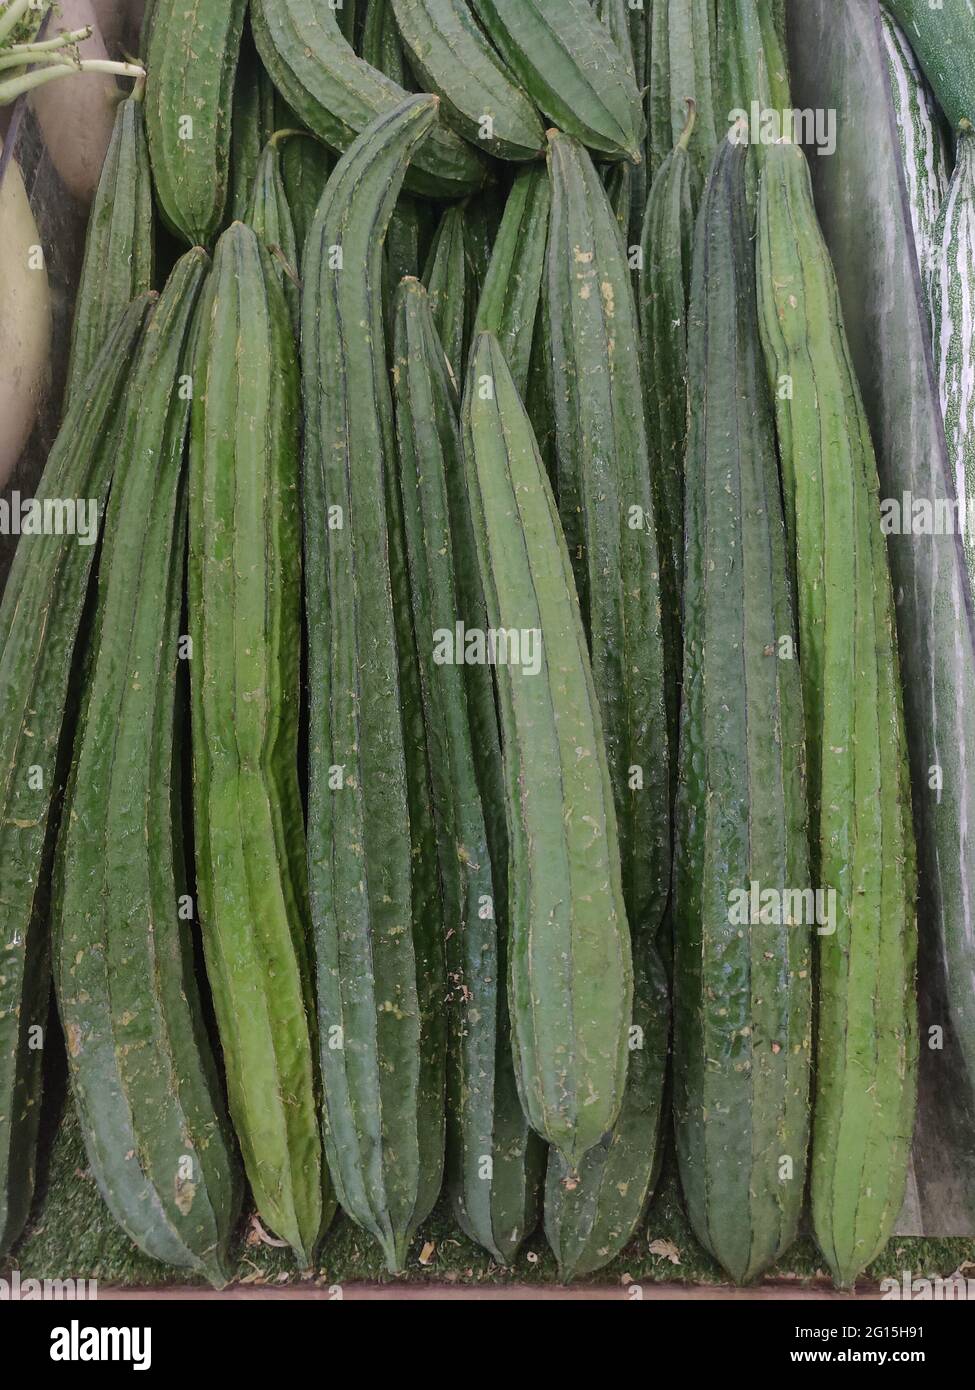 Chinese okra is tender; the bright white flesh has spongy texture and offers a silky, subtly sweet flavor when cooked. As it matures, the skin becomes Stock Photo